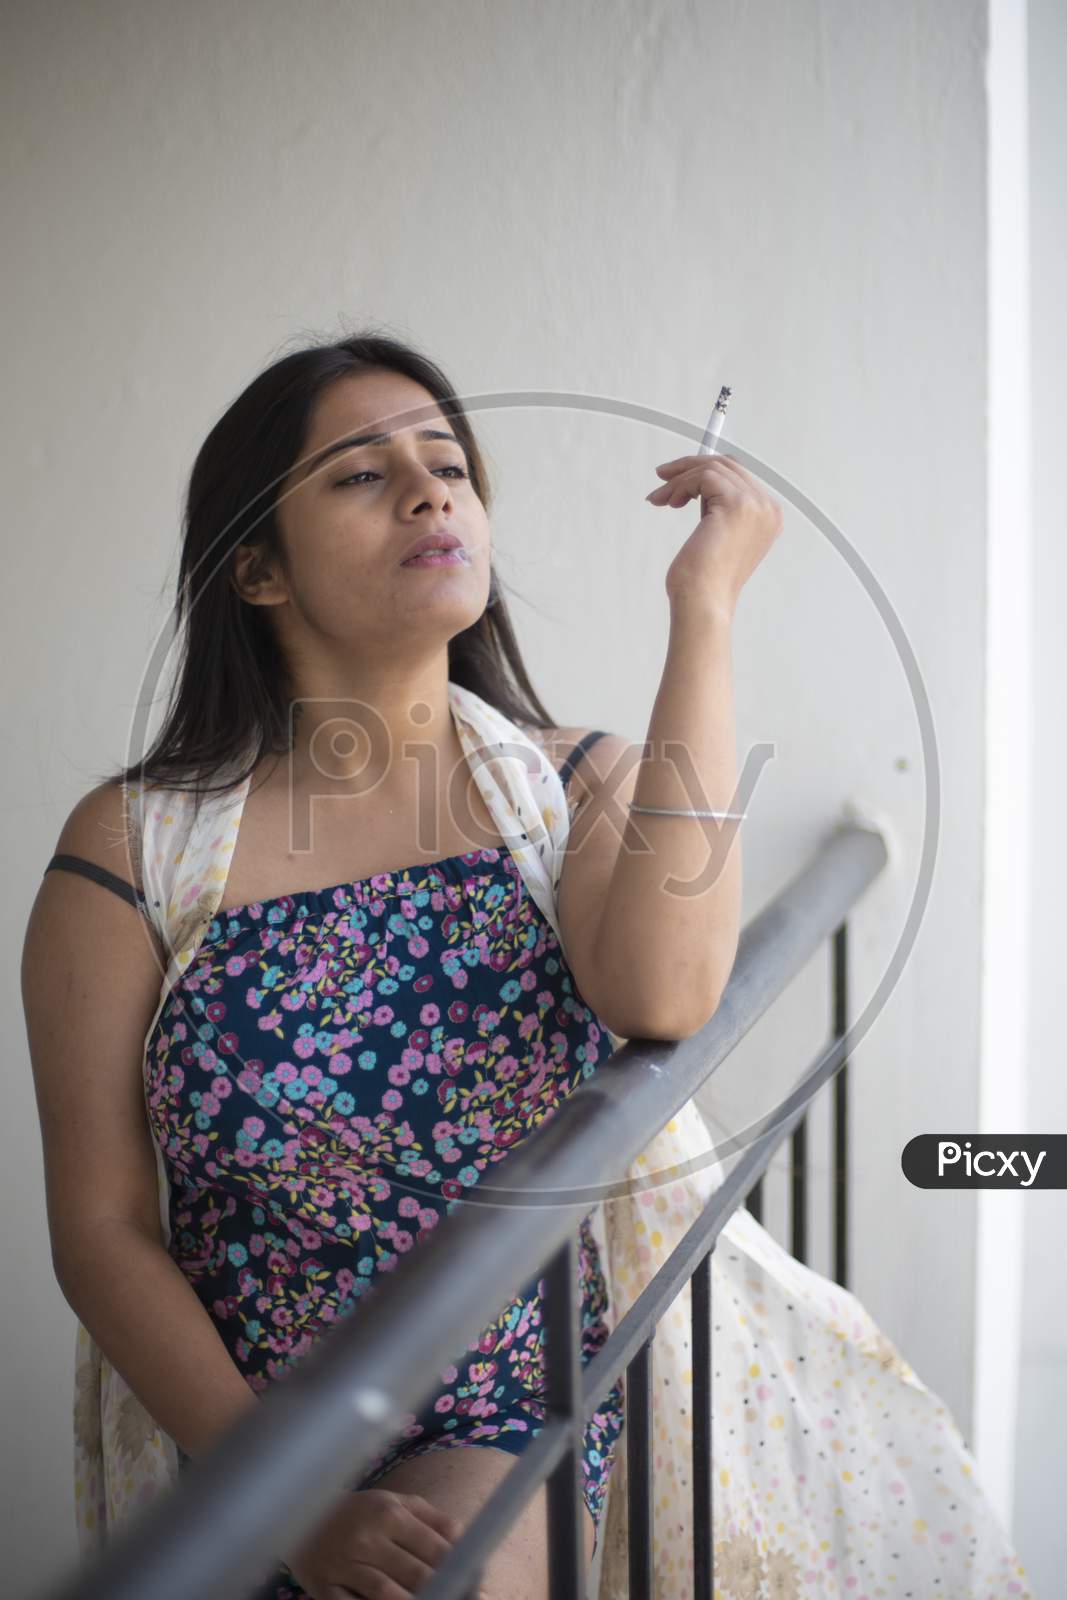 An young and attractive Indian Bengali brunette woman in white sleeping wear is smoking cigarette on the balcony in the morning in white background. Indian lifestyle.